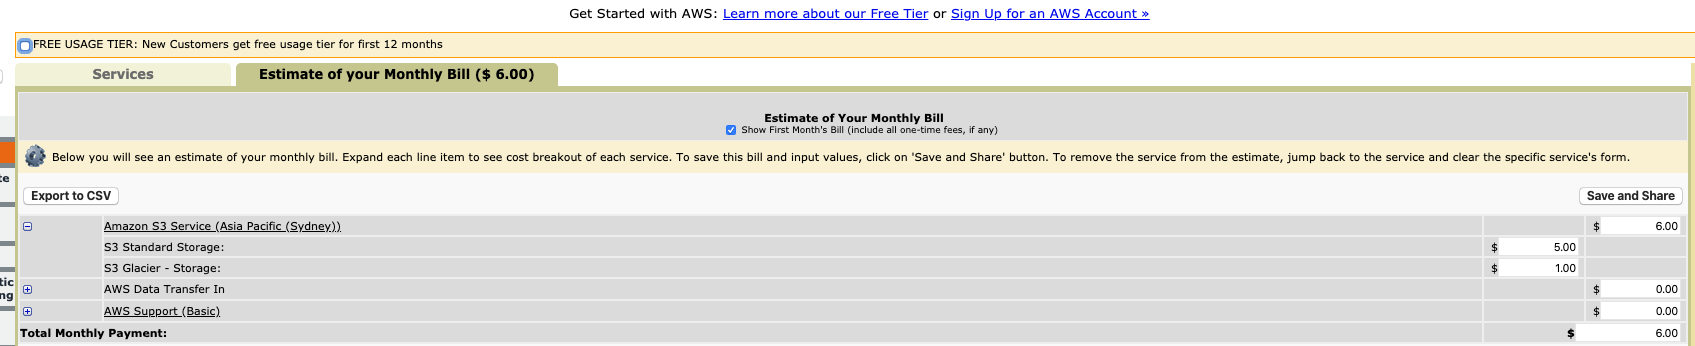 aws_storage_cost.png